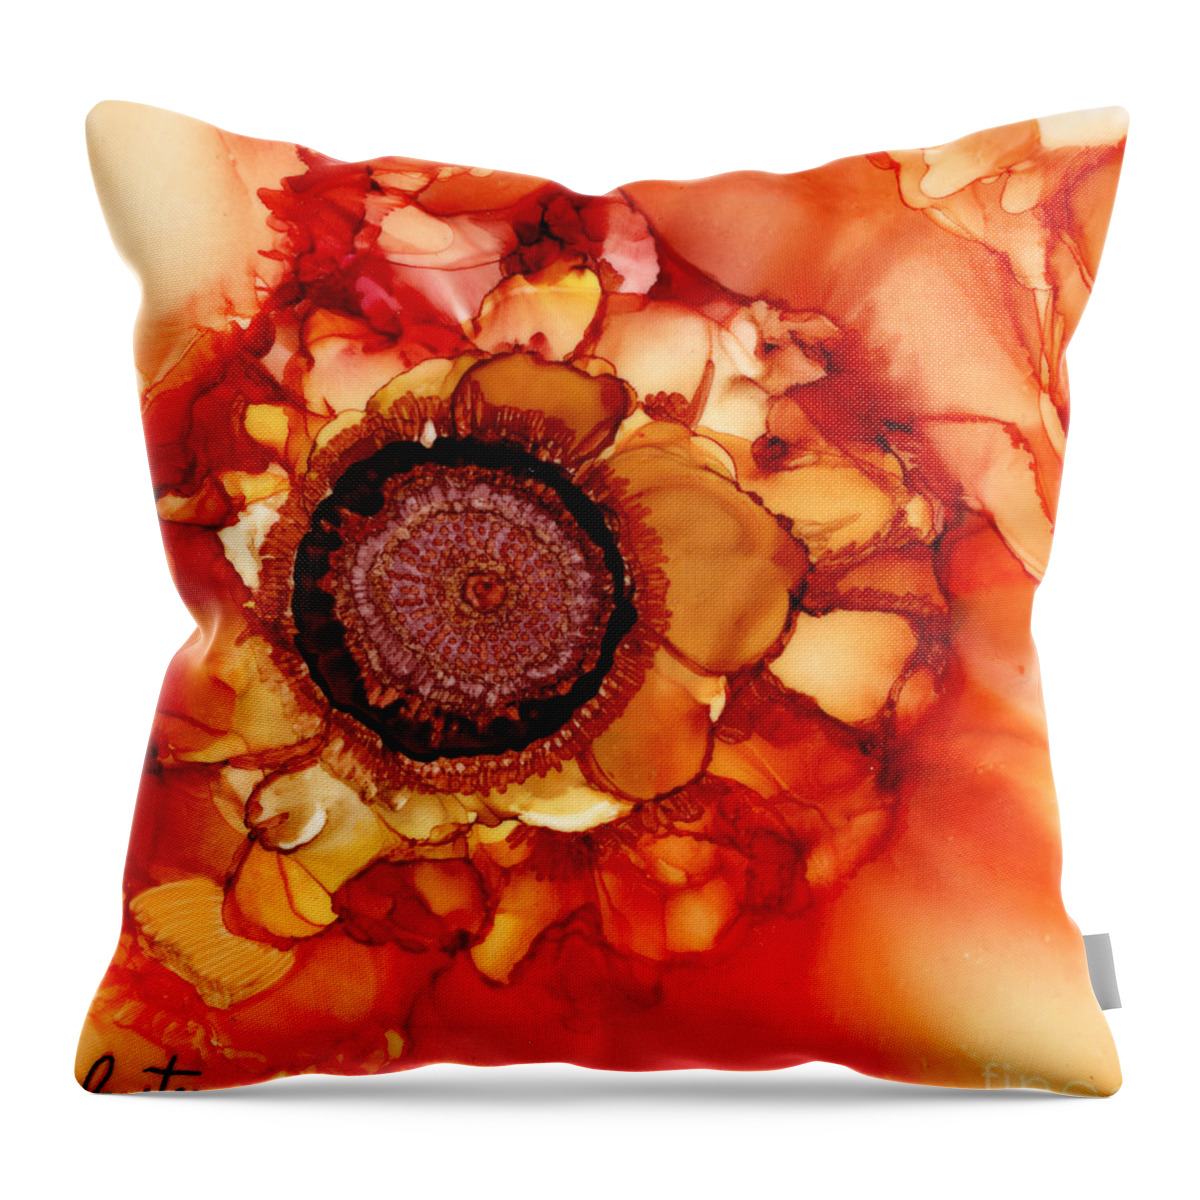 Sunshine Rose Throw Pillow featuring the painting Sunshine Rose by Daniela Easter